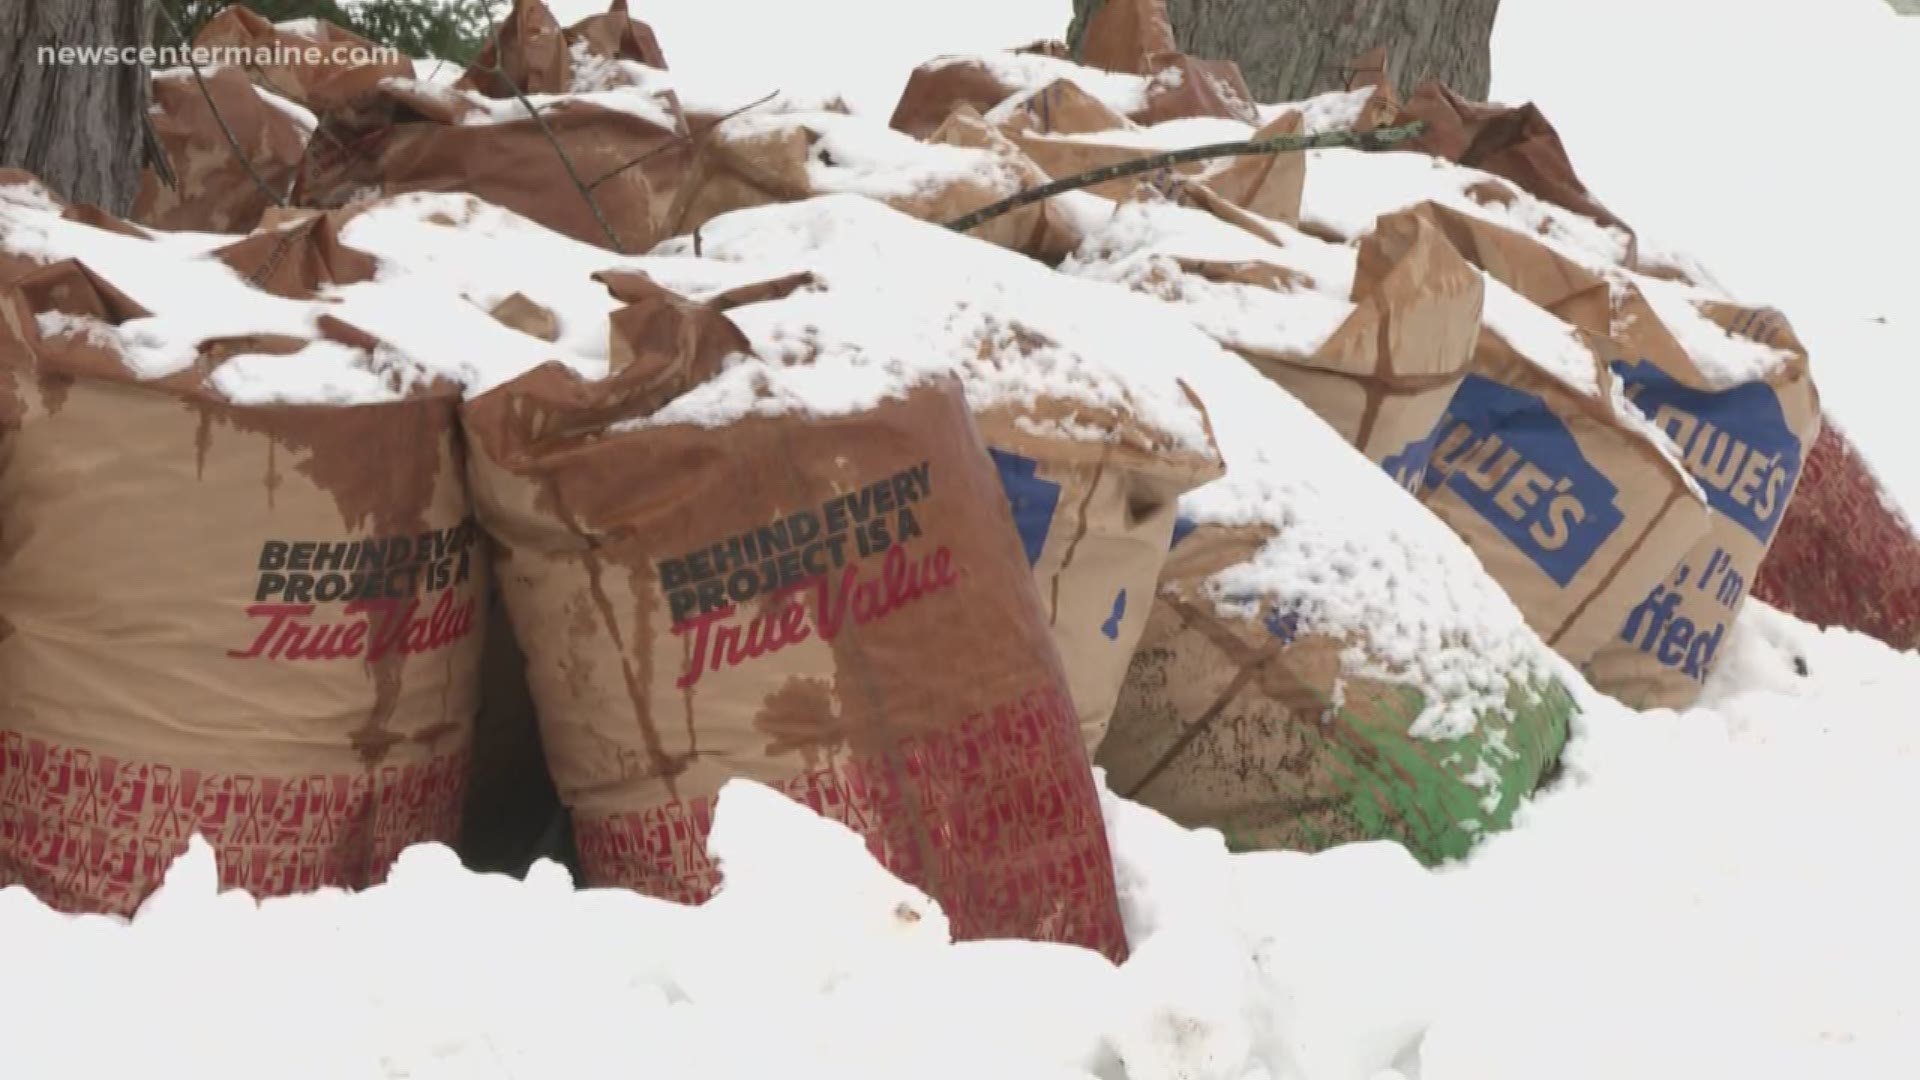 Early snow season's effect on fall cleanup